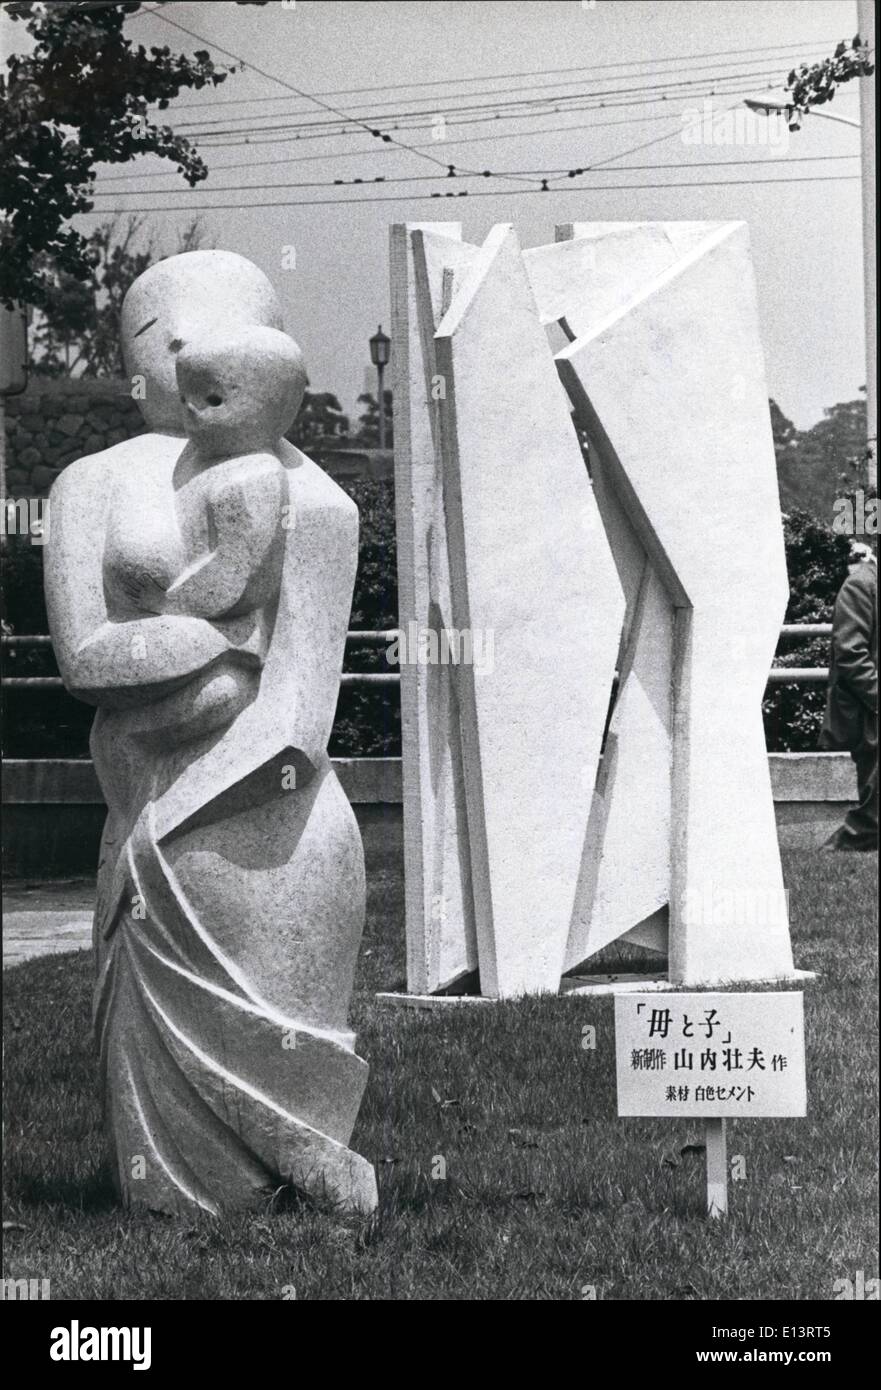 Mar. 27, 2012 - Concrete Art: Japanese sculptors are exhibiting their work created from blocks of white cementin hibiya Park, in the heart of Tokyo this week. Photo shows statues of concrete by Japanese sculptors on public view in the park. Stock Photo